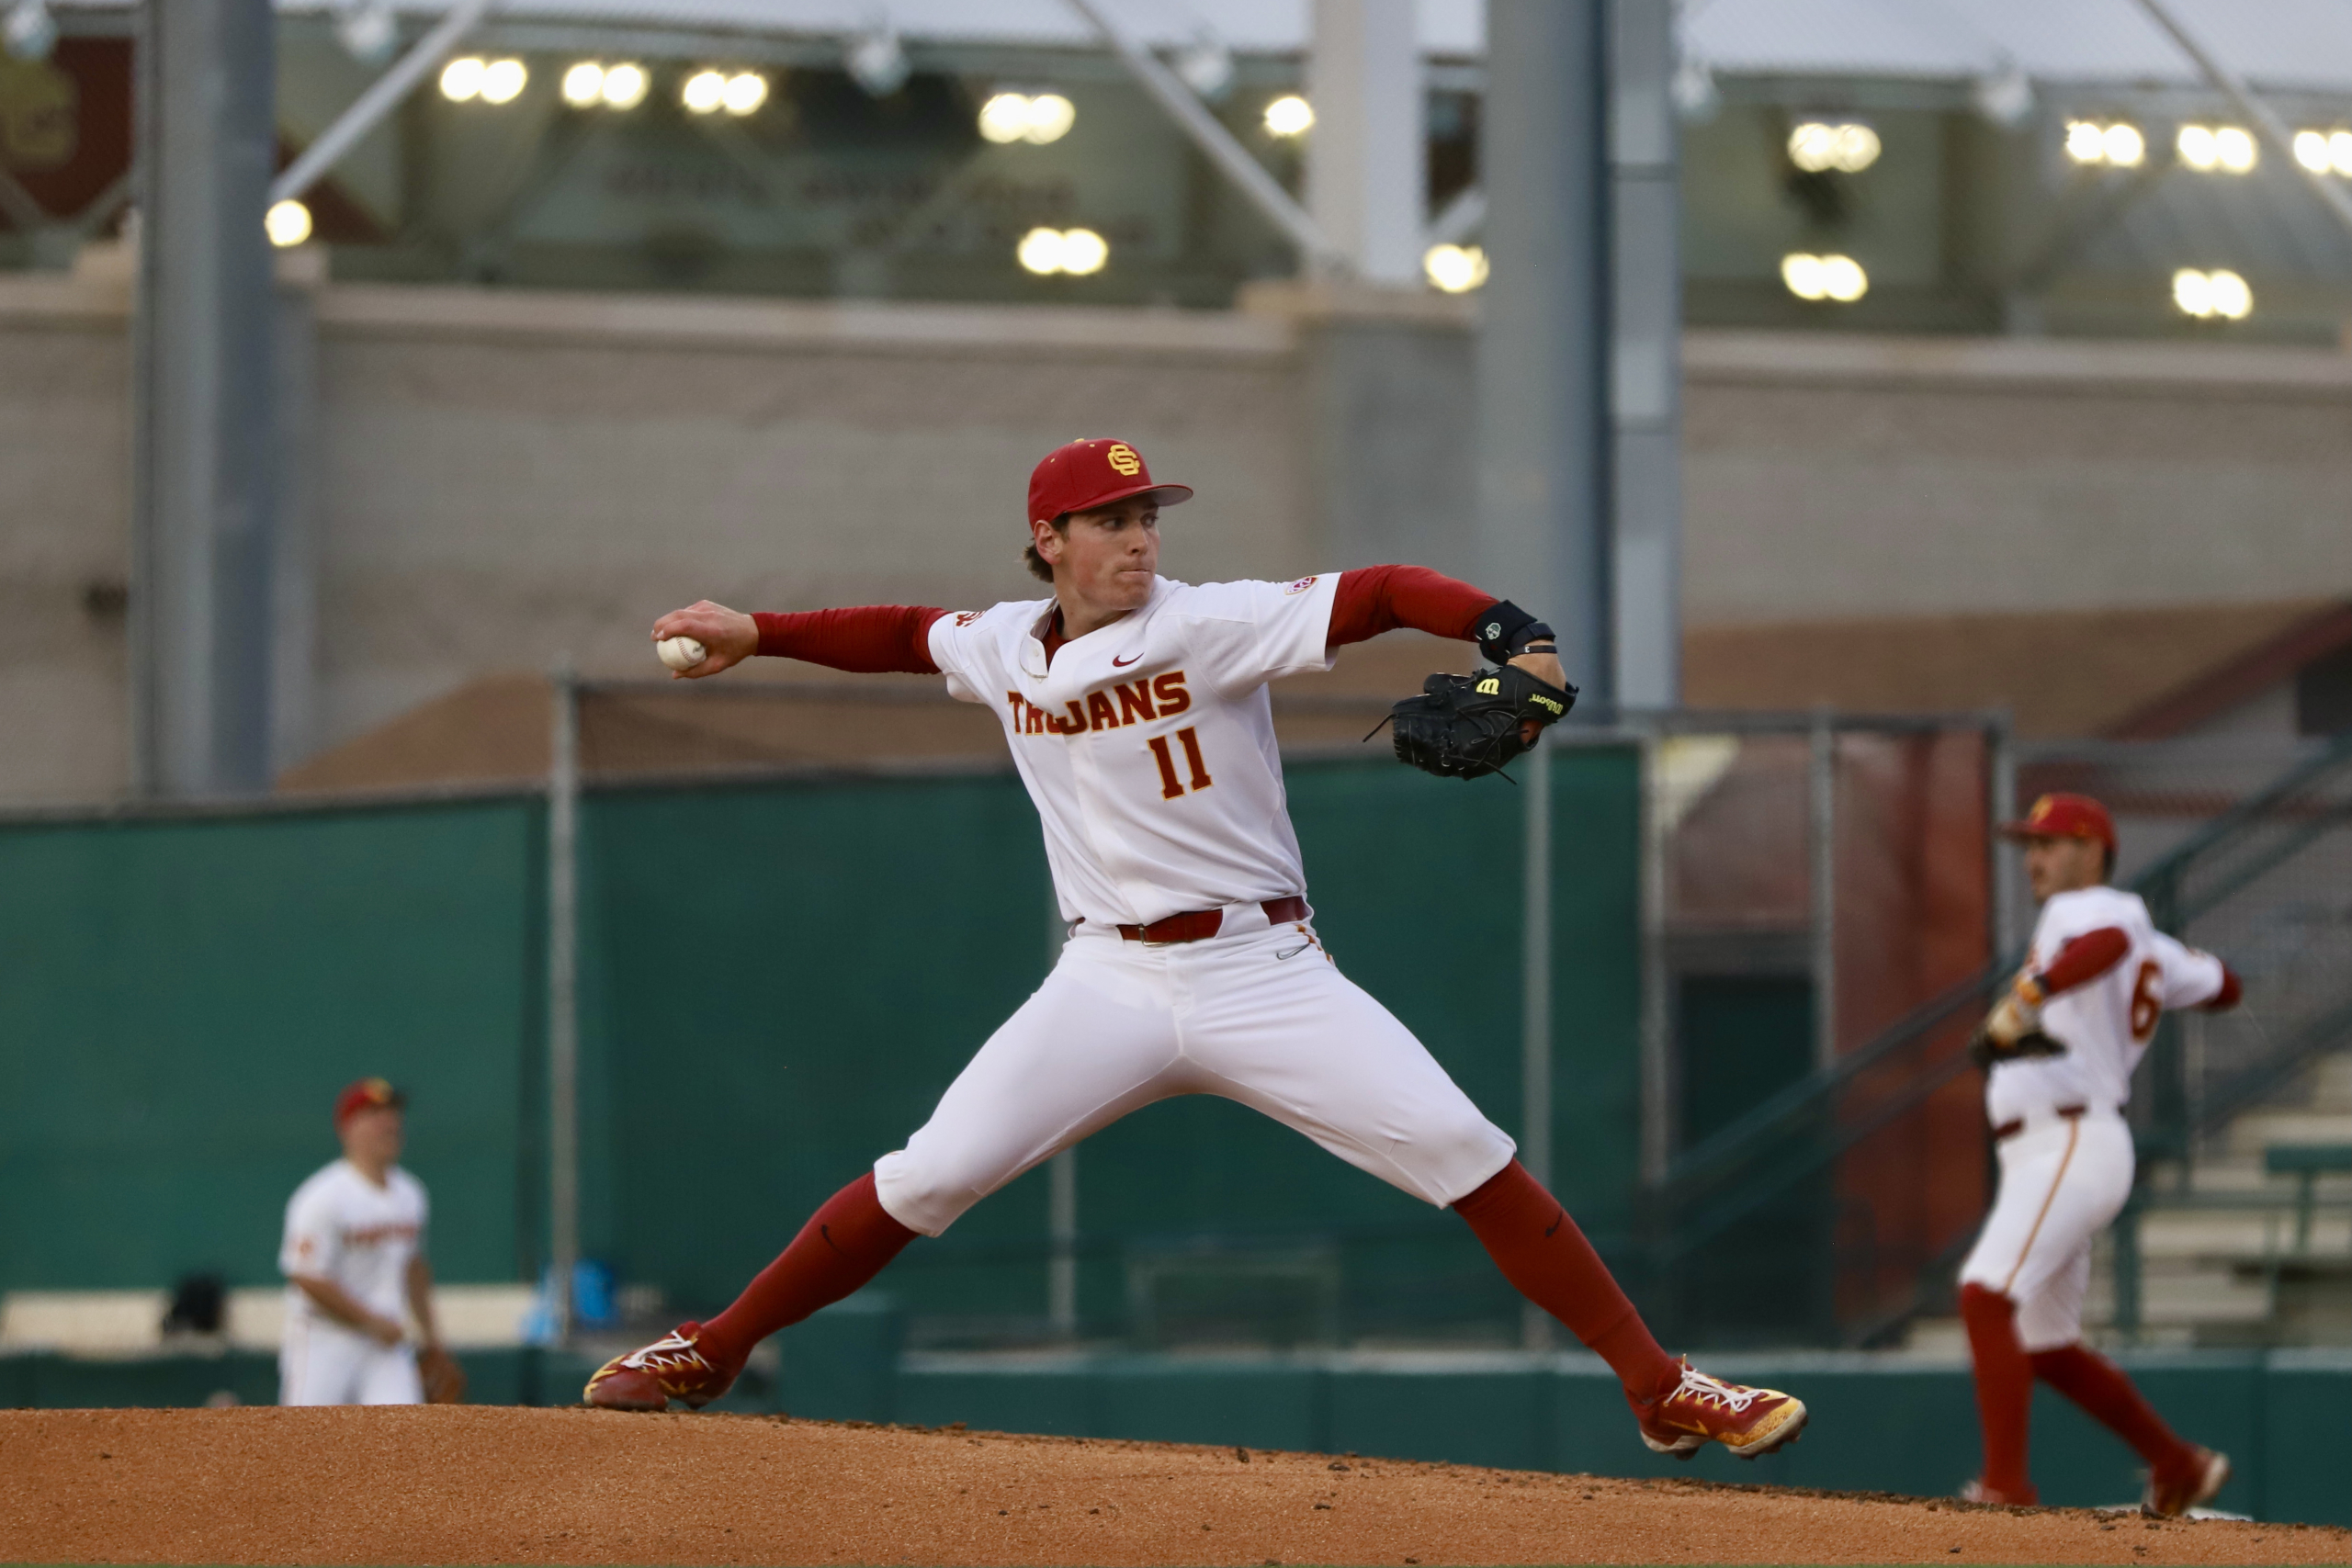 USC baseball is now tied for third place in Pac-12 standings